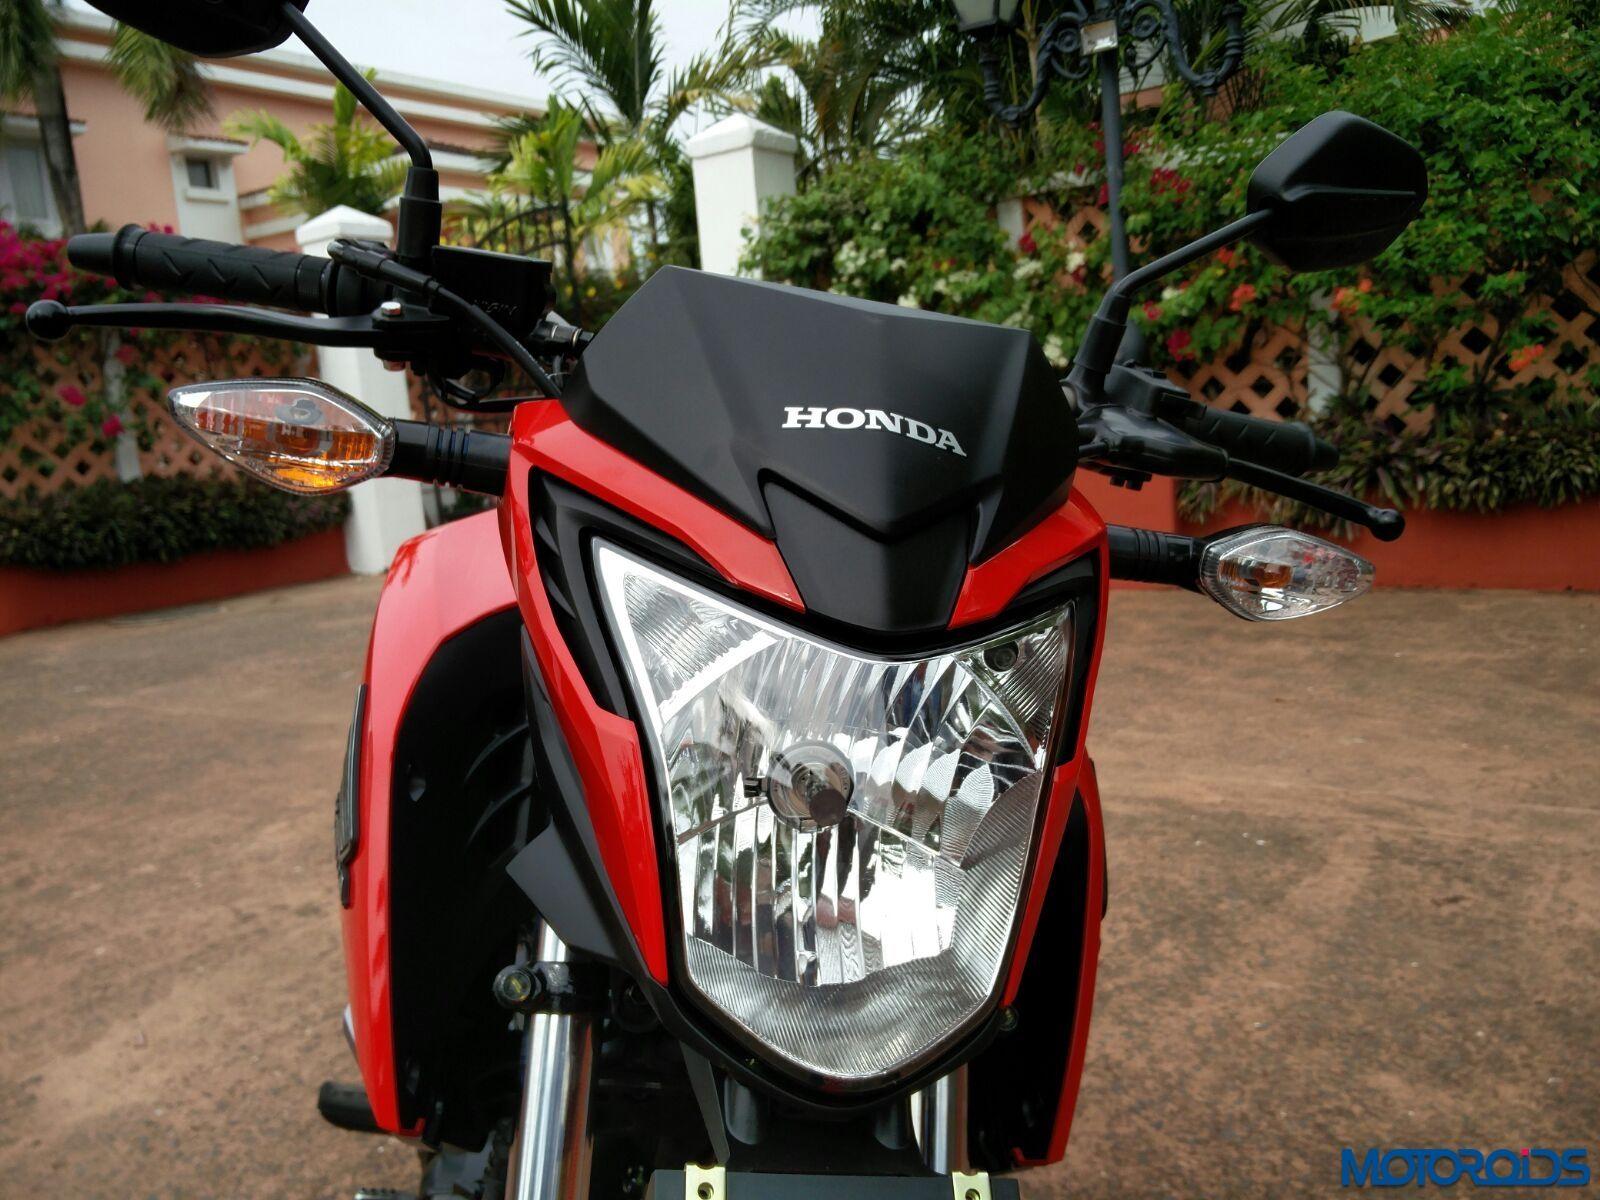 Honda CB Hornet 160R first ride review, image, specs and details